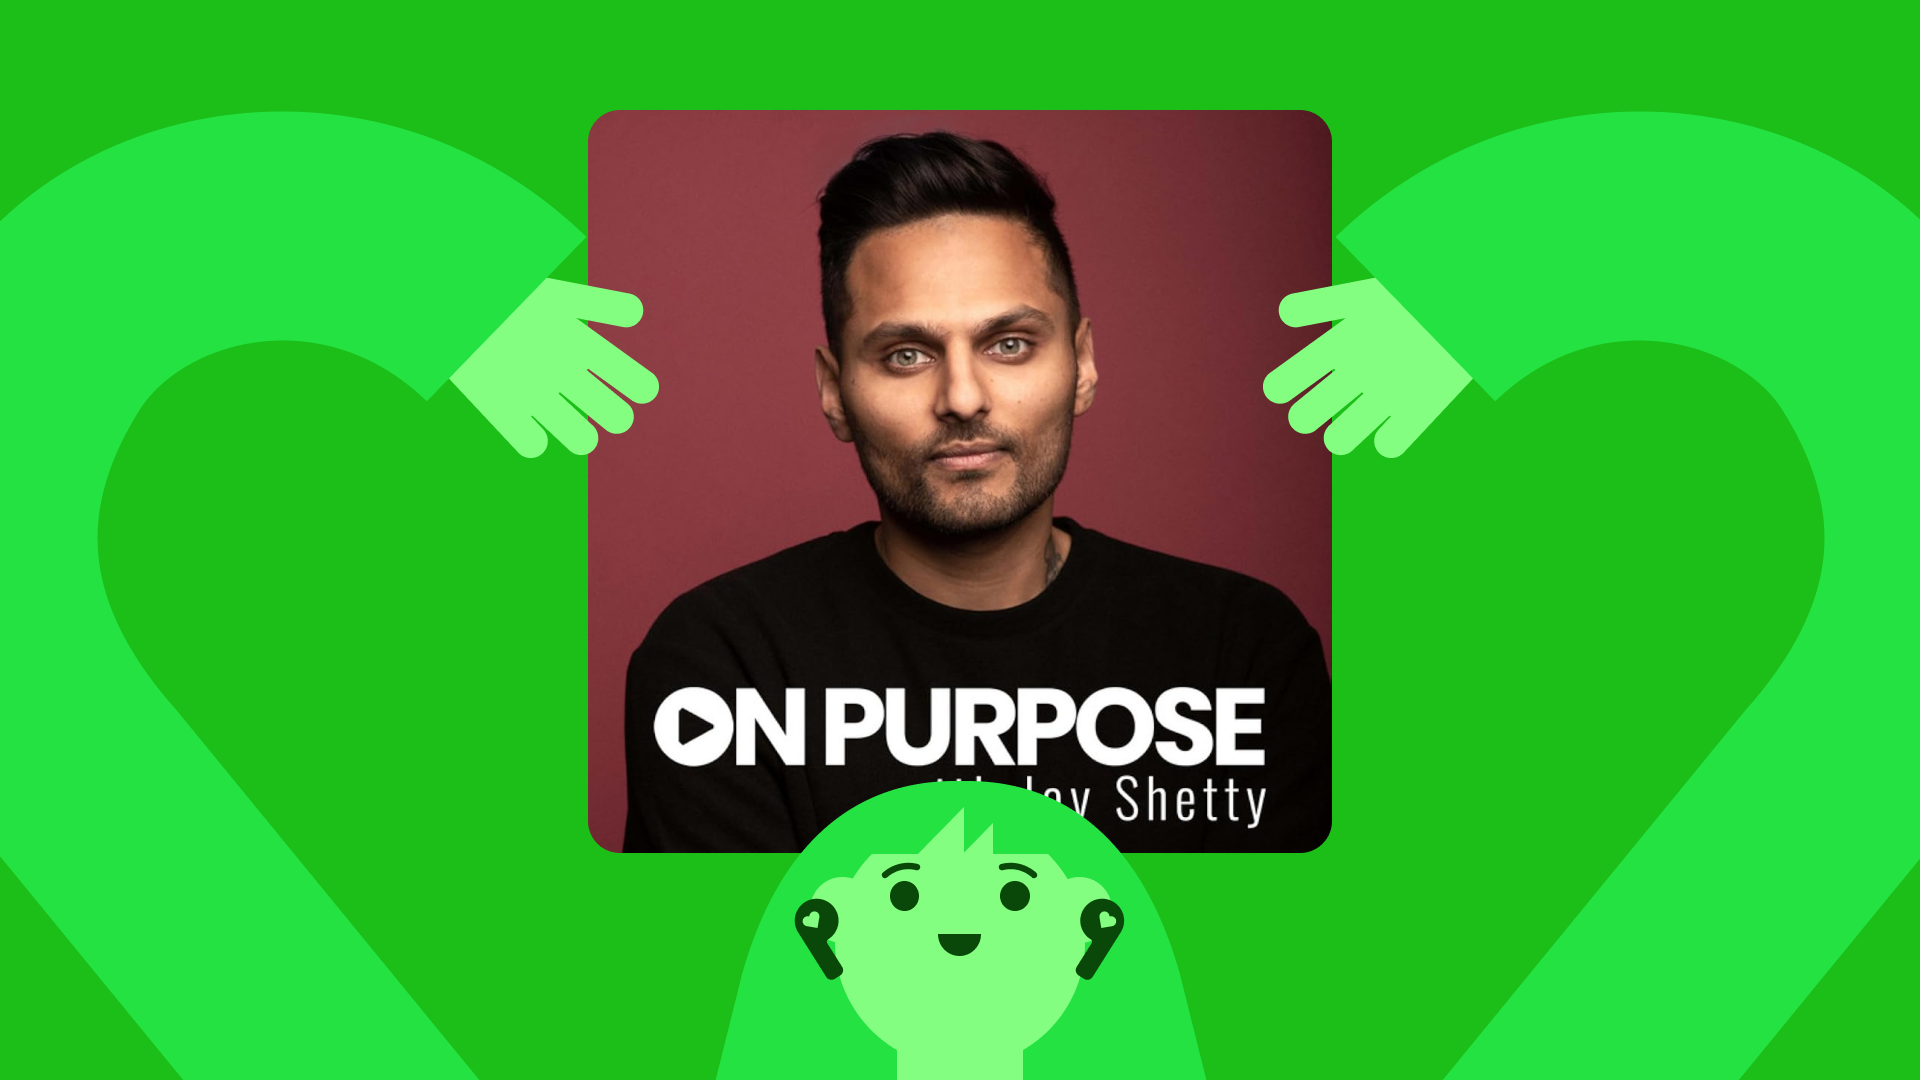 On Purpose podcast with Jay Shetty